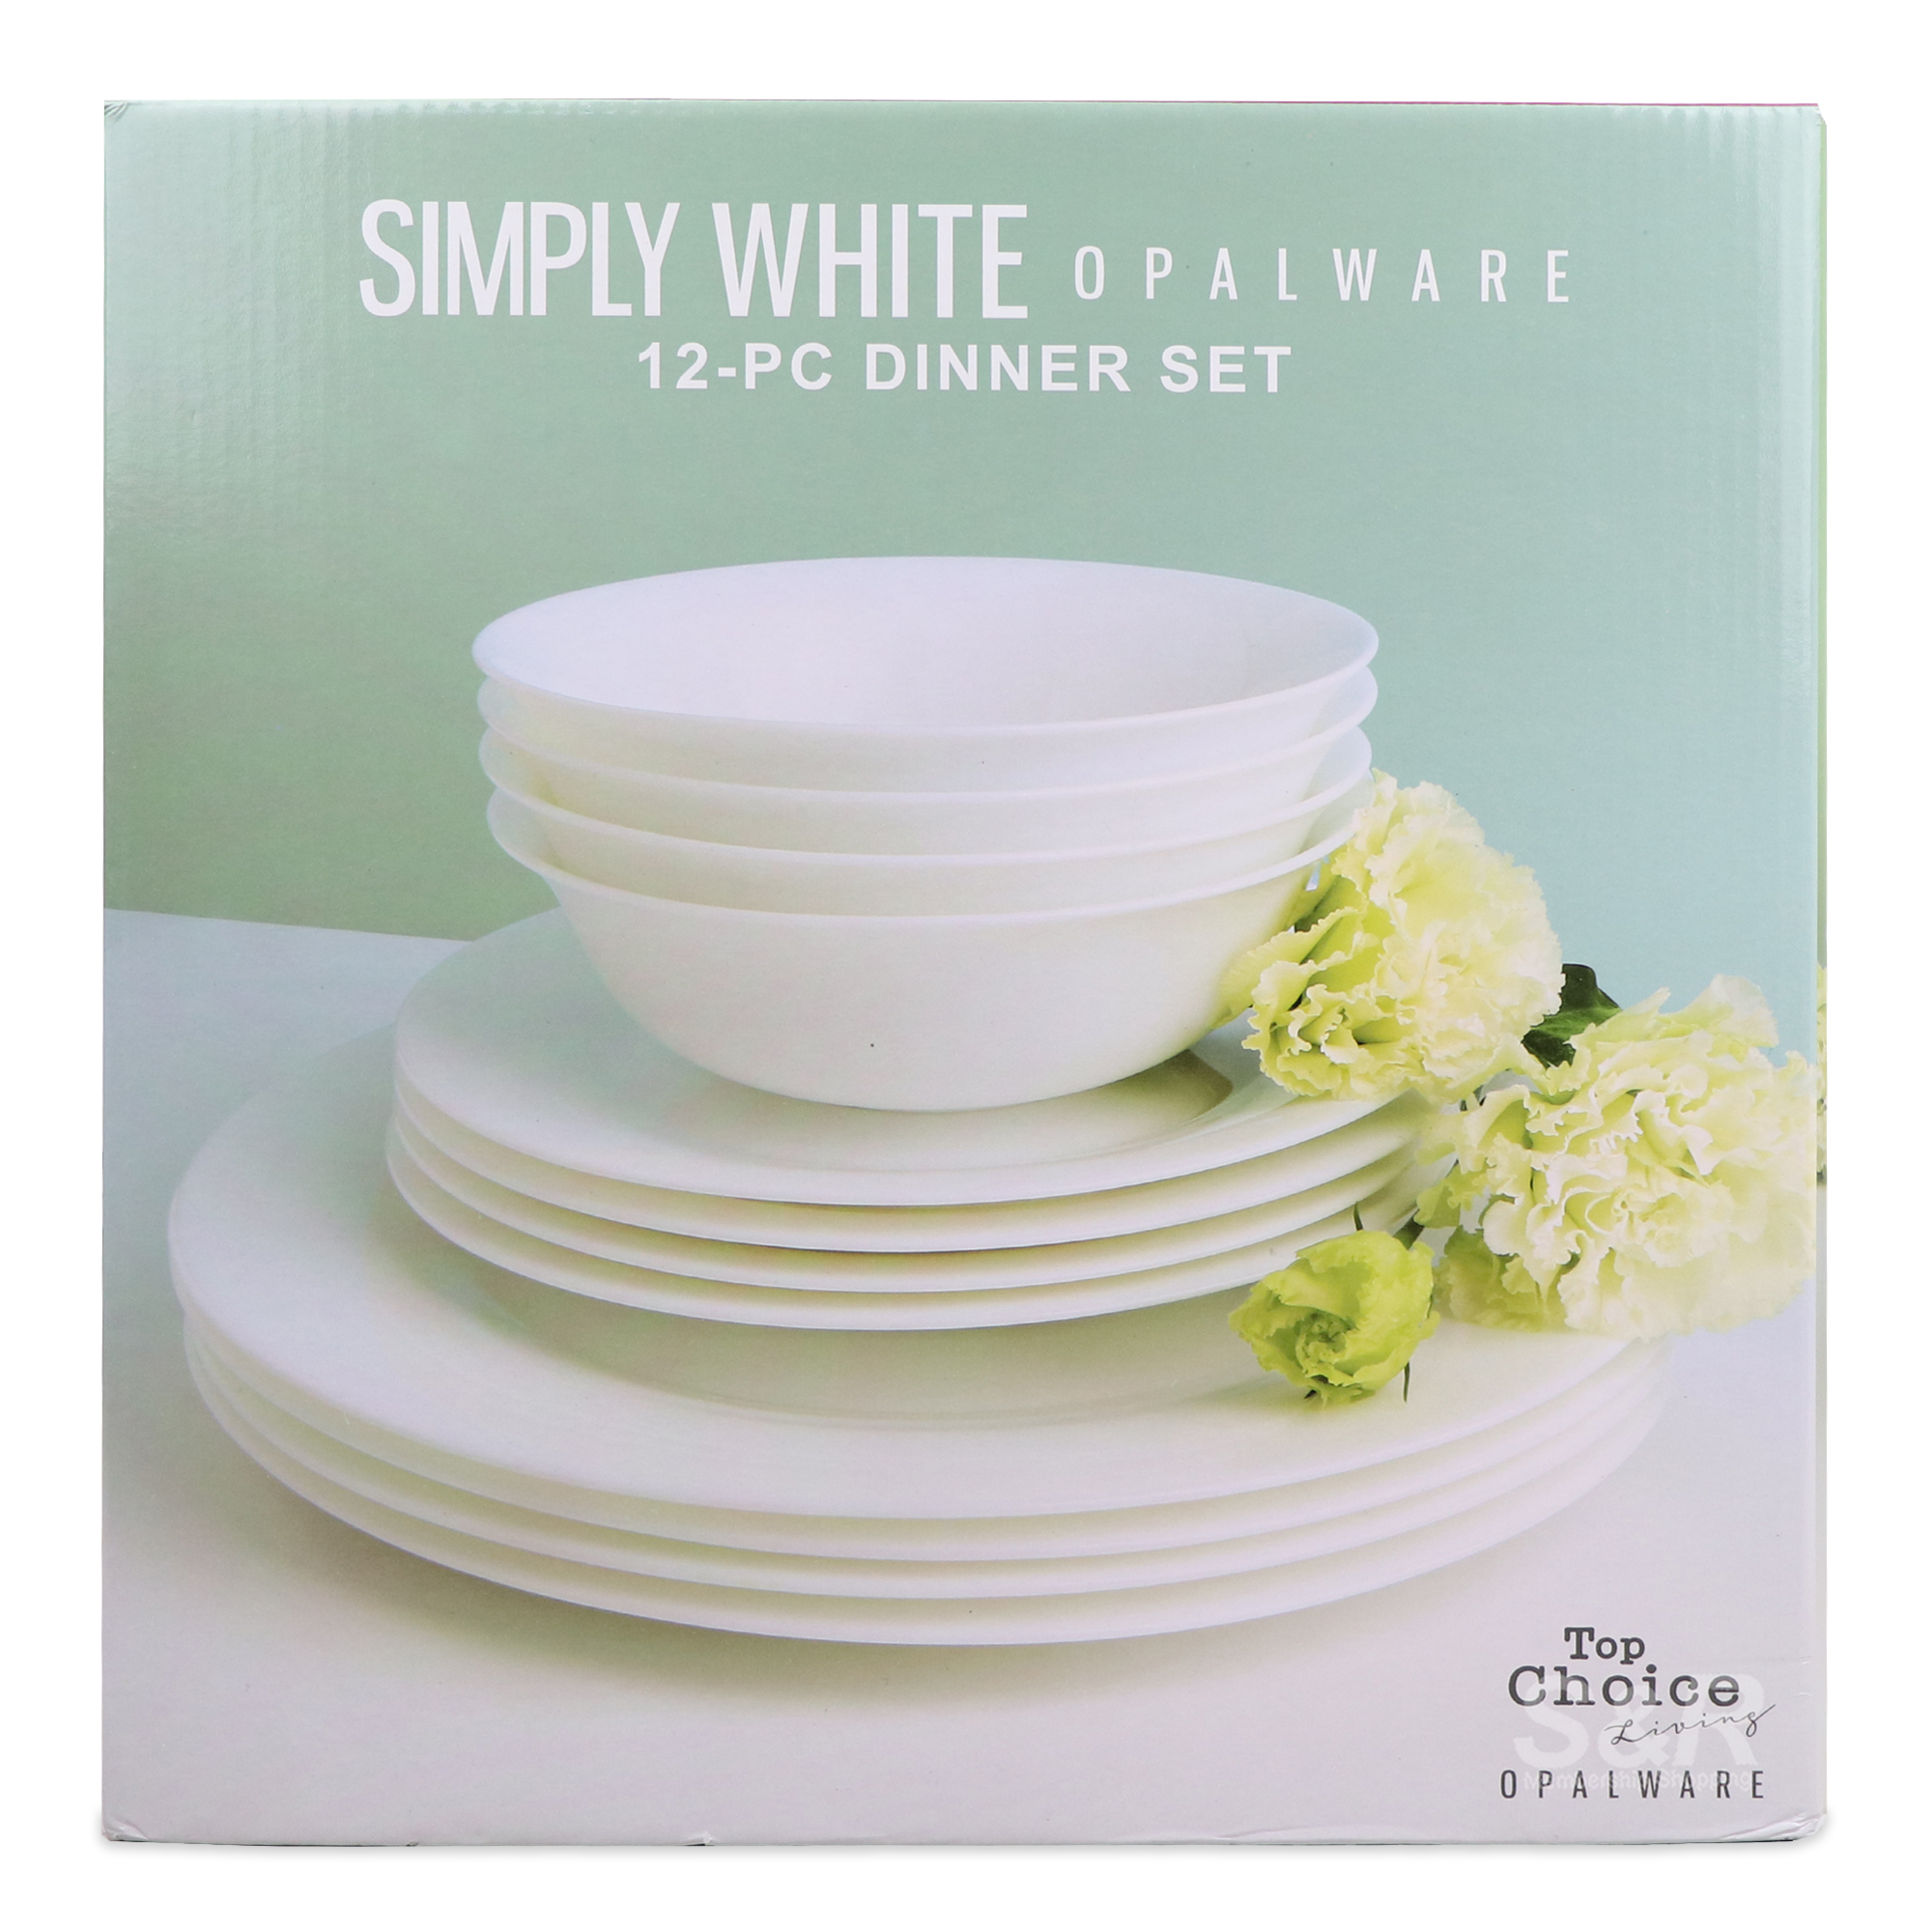 Top Choice Living Simply White Opalware 12-pc Dinner Set